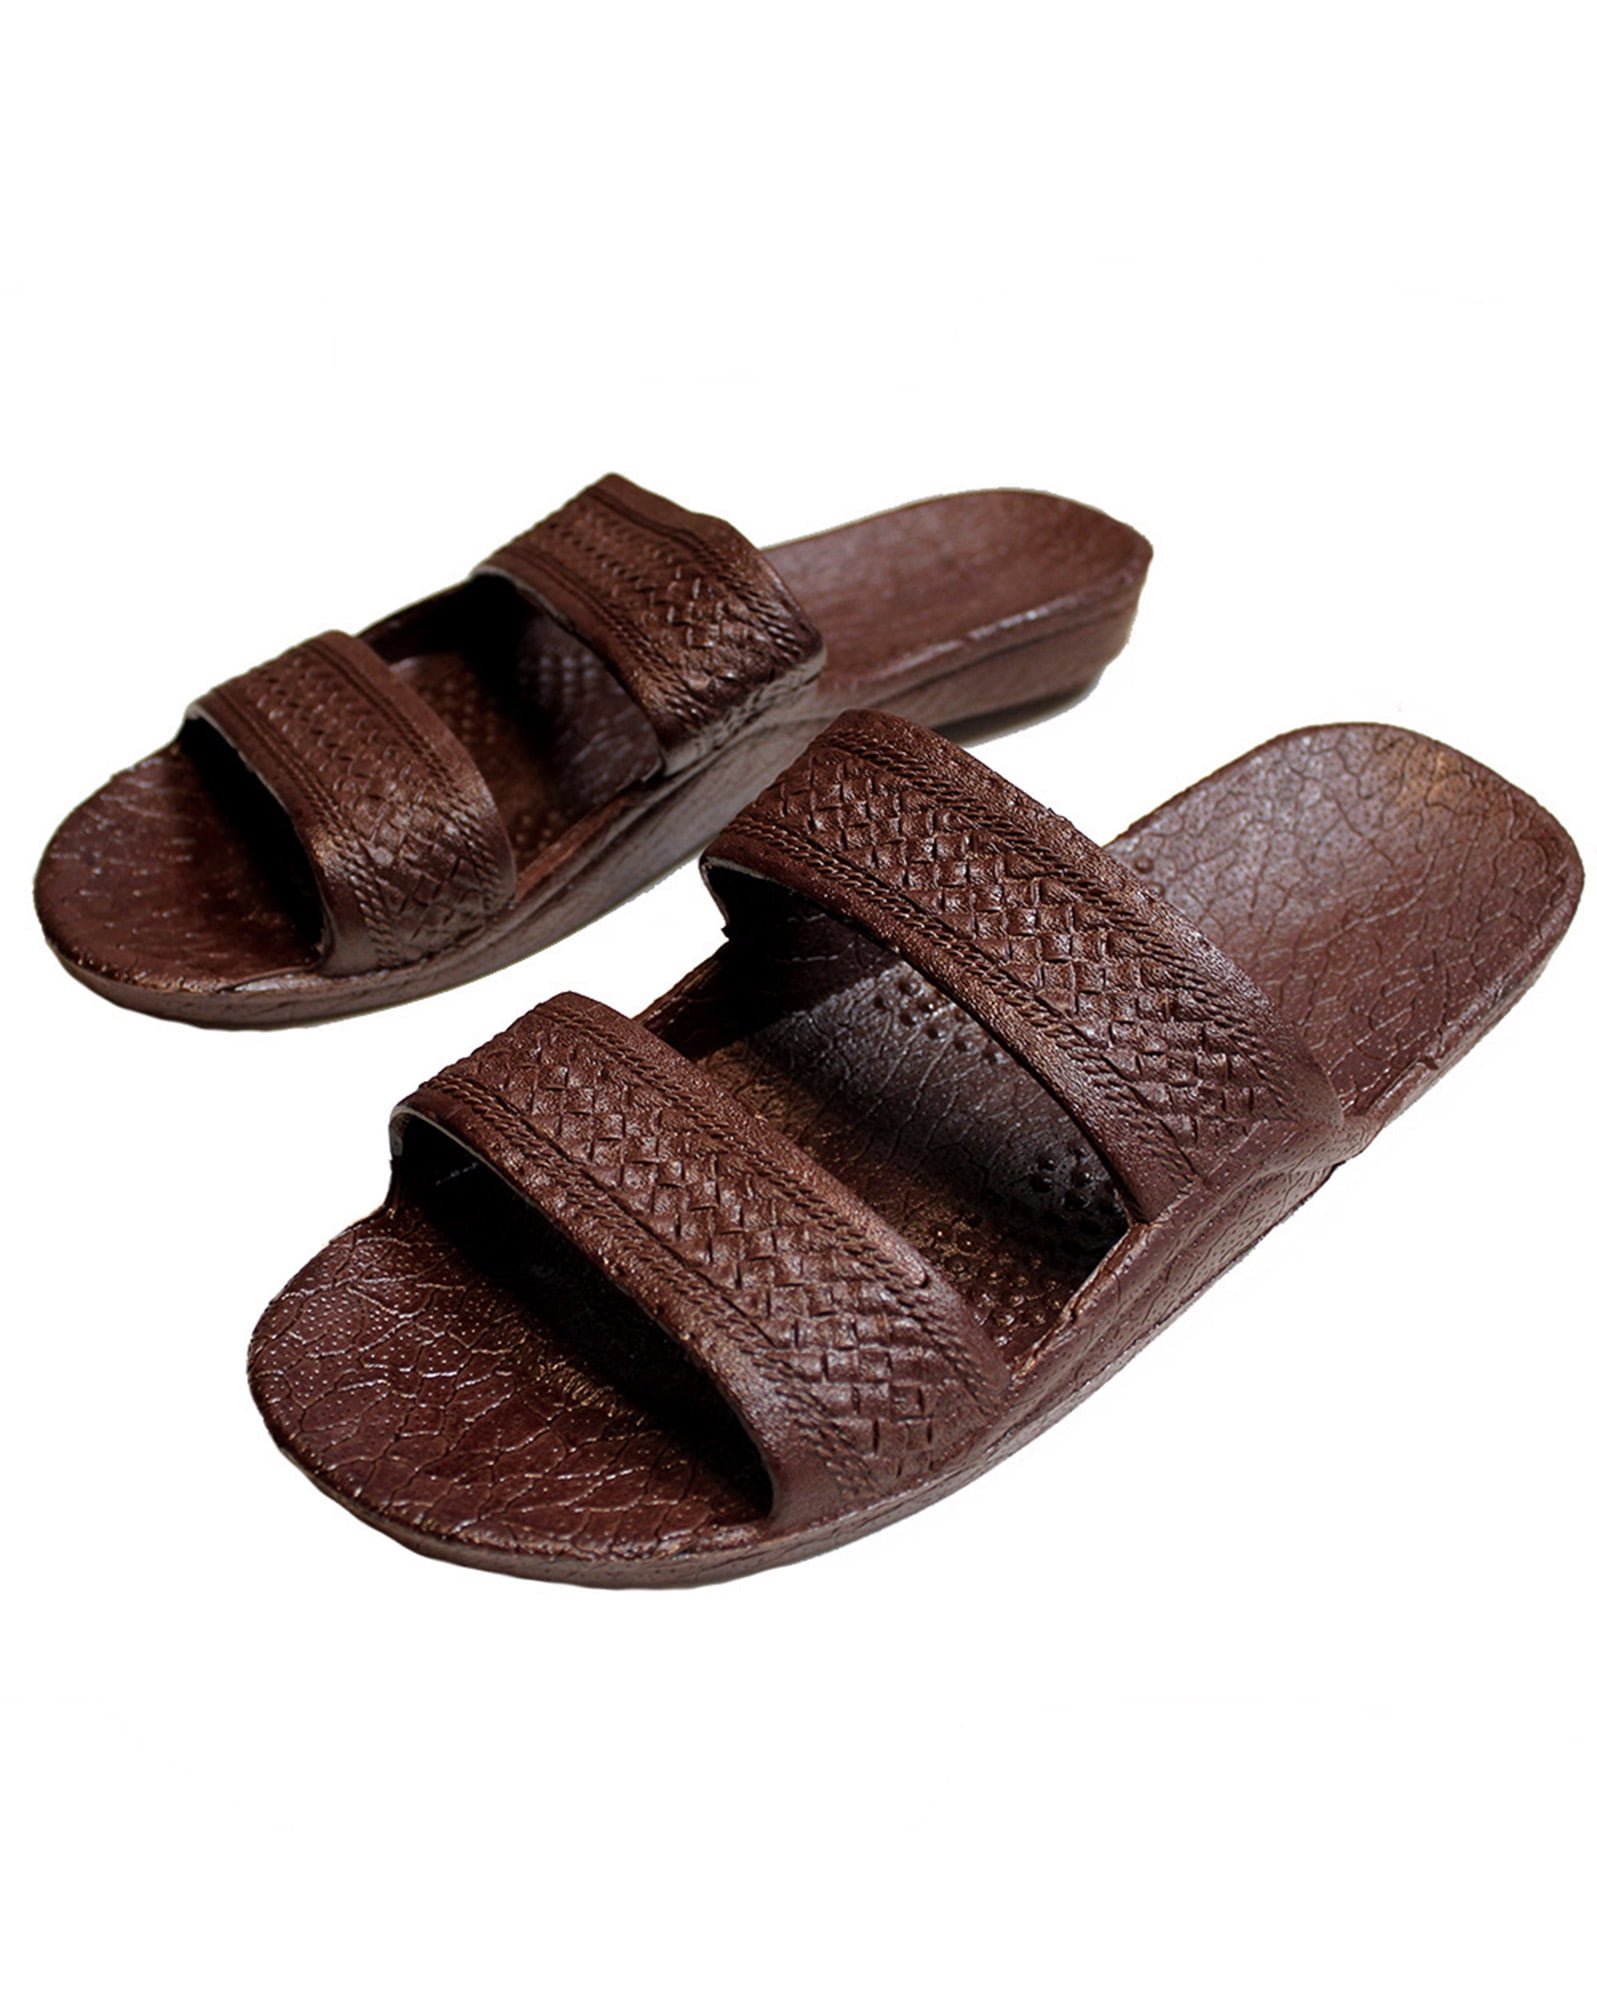 Rubber Double Strap Jesus Sandals By Imperial Hawaii for Women Men and  Teens (Womens Size 9, Mens size 7.Brown) - Walmart.com